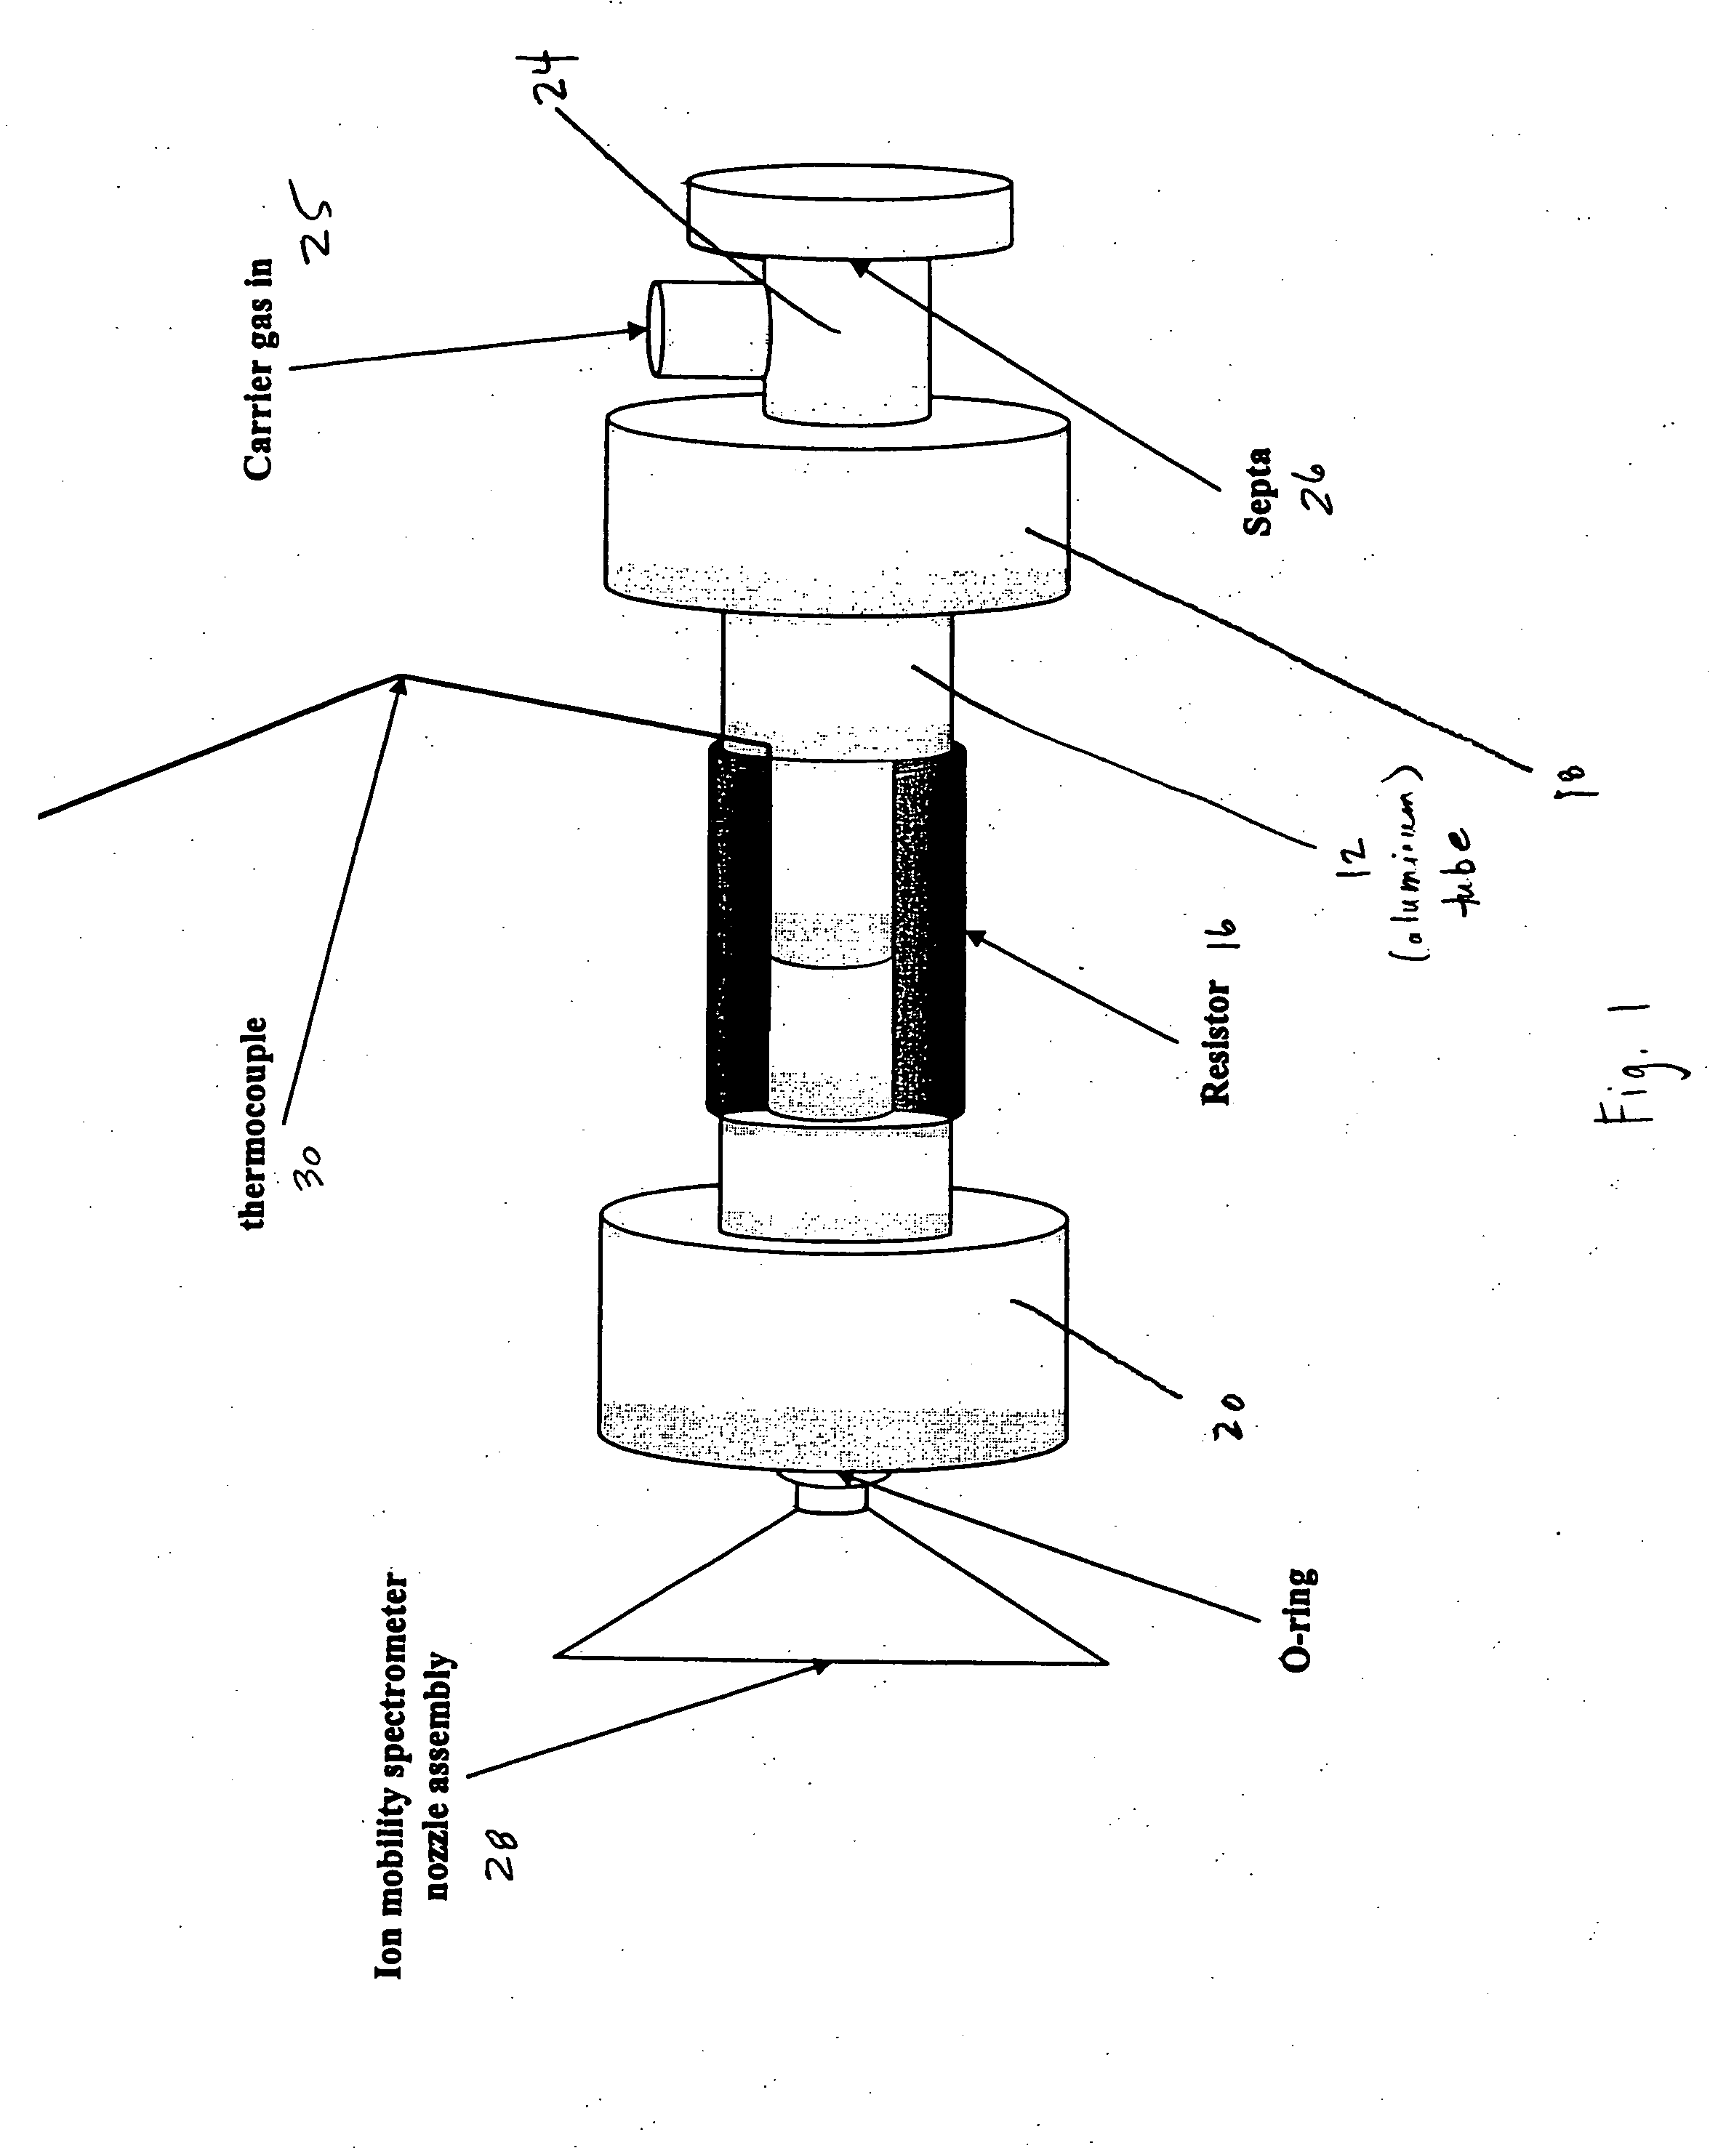 Method and apparatus for Detecting Explosives